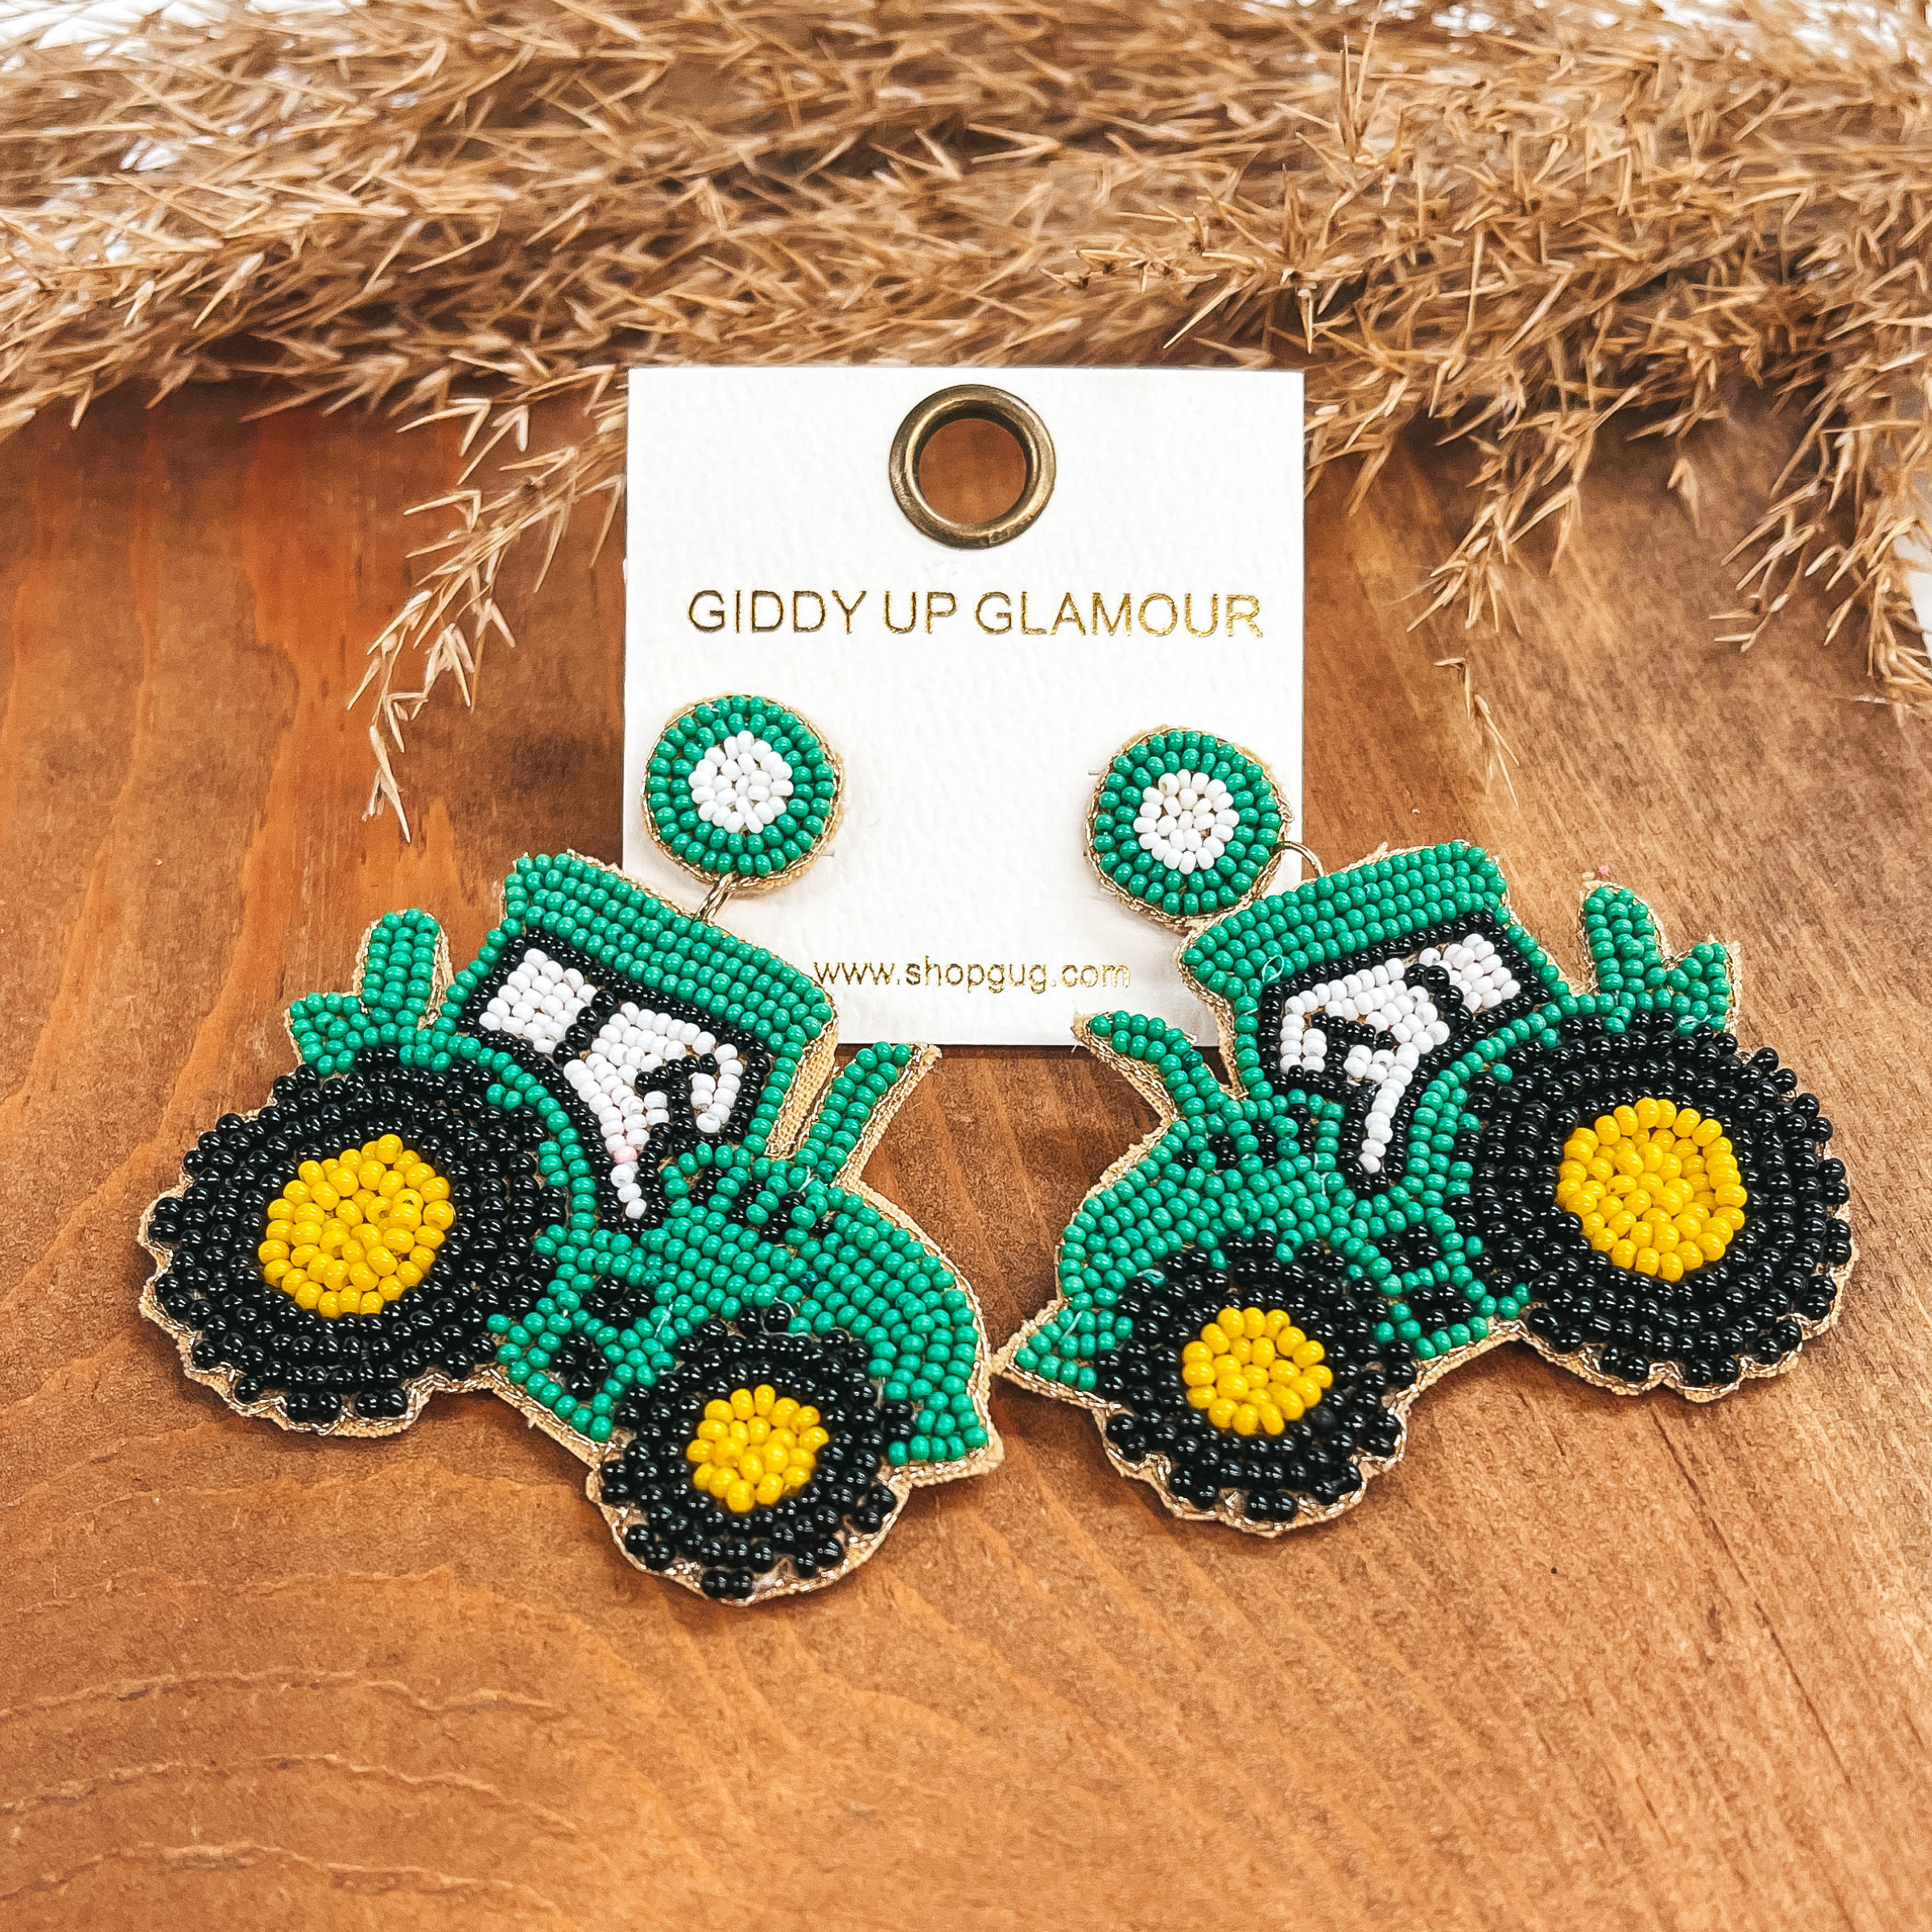 Post back earrings with a green tractor drop with green, yellow, black, and white beads. Taken on a  brown block with a brown plant in the back as decor.